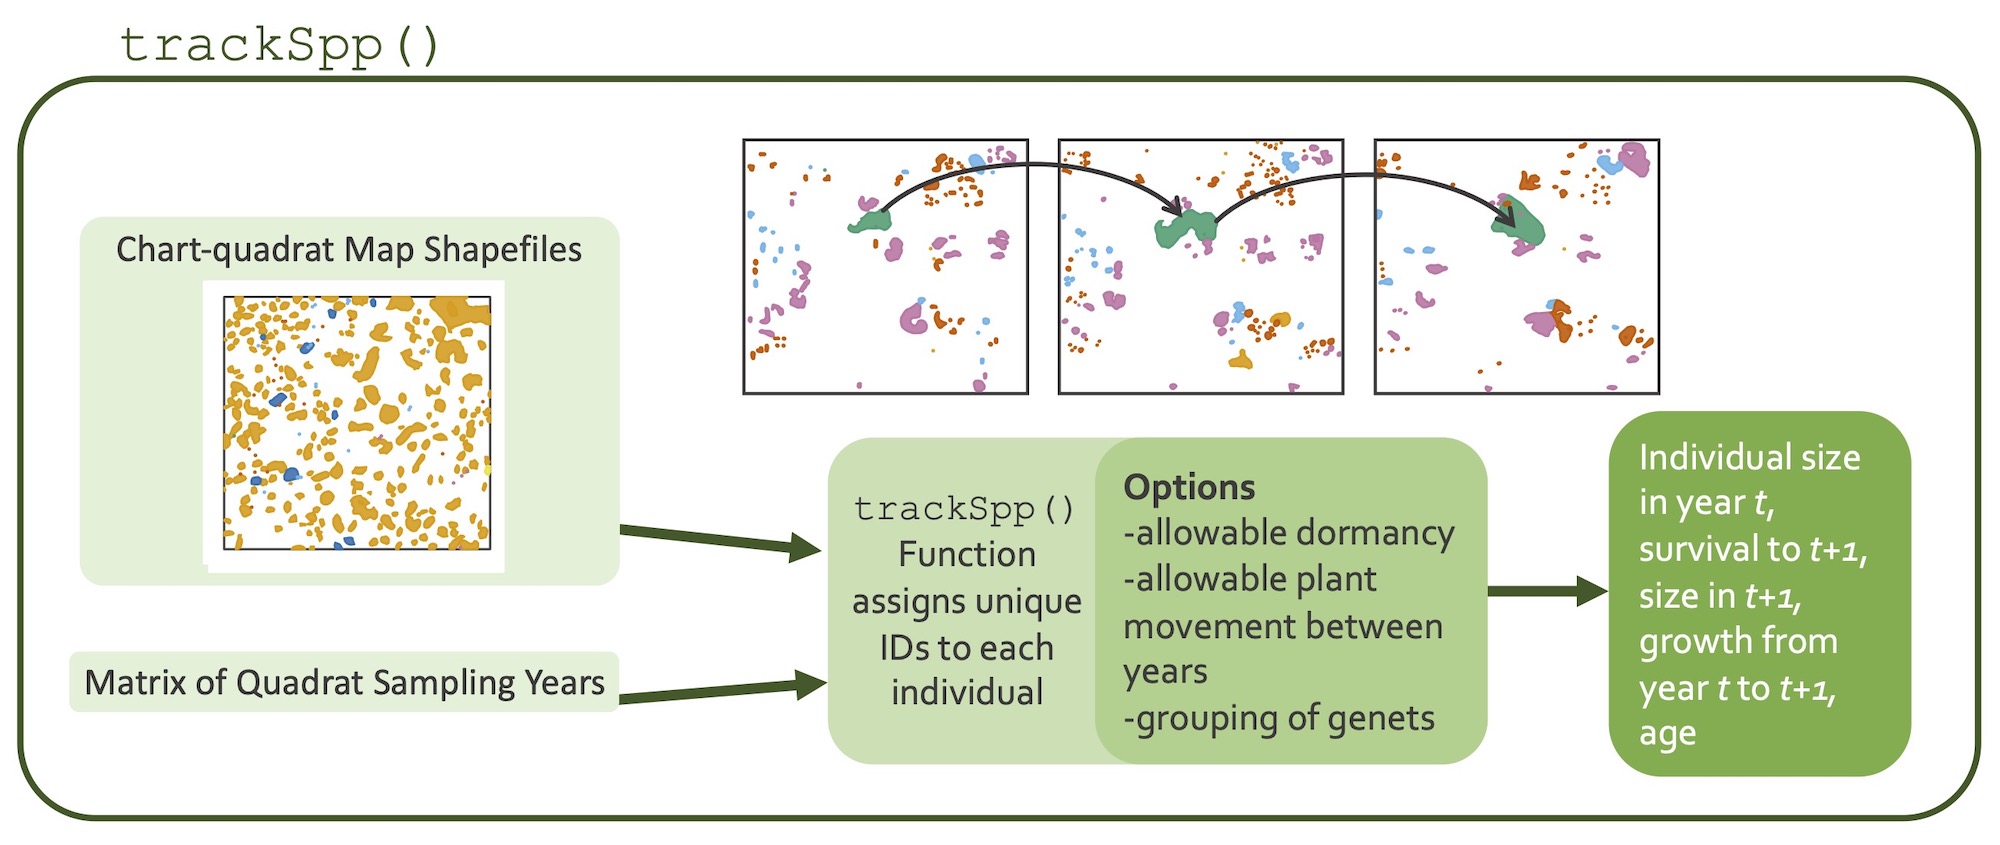 A diagram of how the trackSpp() function works